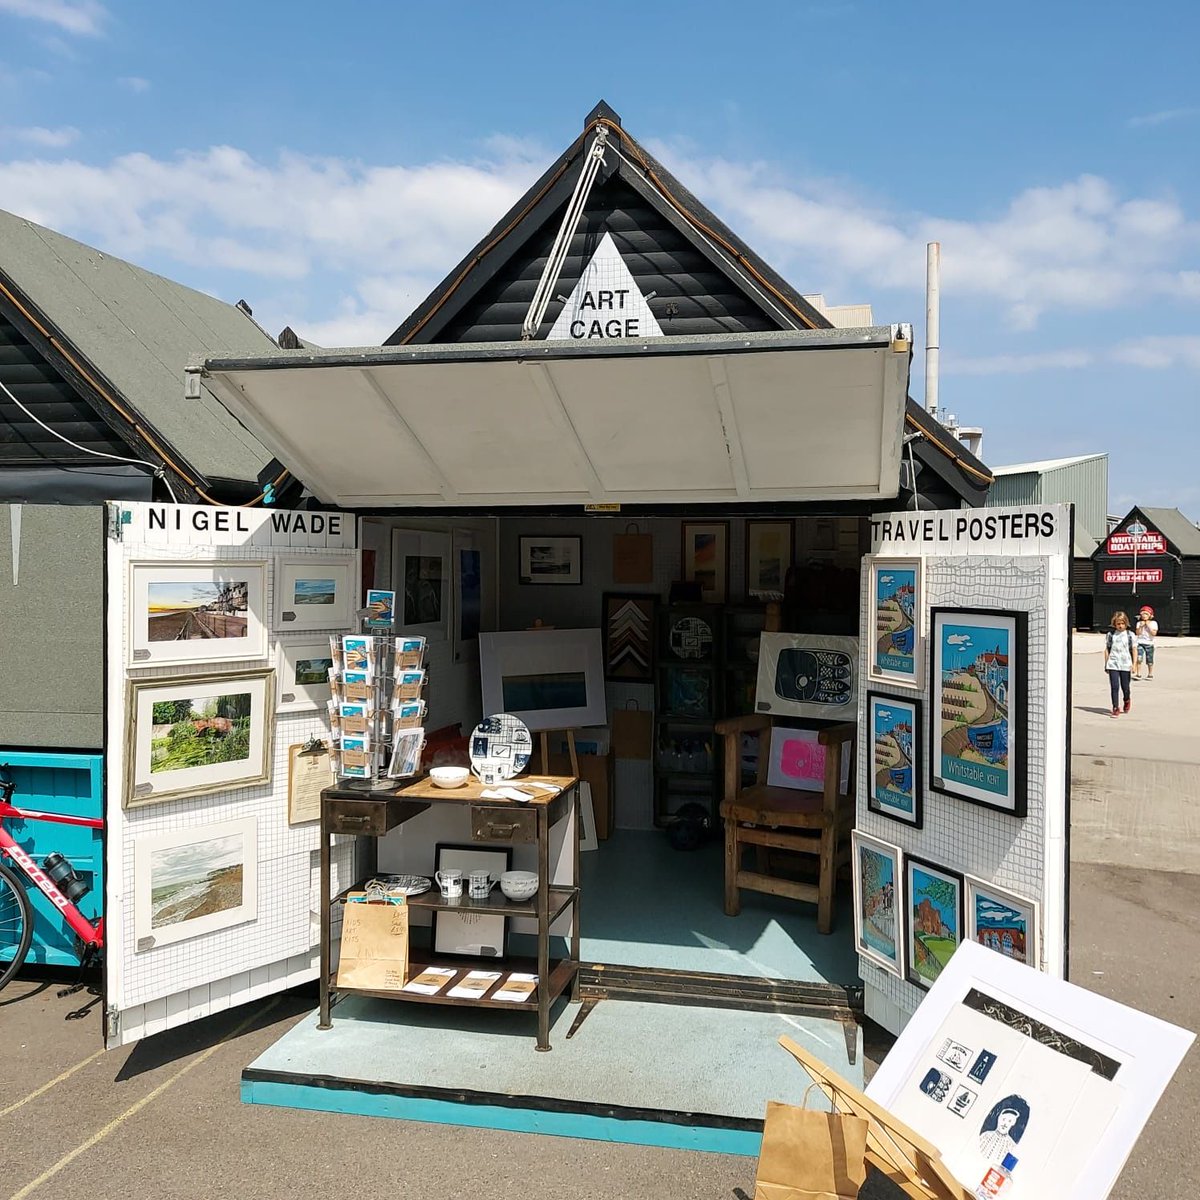 Going to be a lovely day today. Come down for a stroll around the harbour markets...and see our local artwork 🖼 #whitstable #kentartists #kent #harbourlife #artgallery #seaside @nigelwadeart @richclarkimages @artistsusiewest